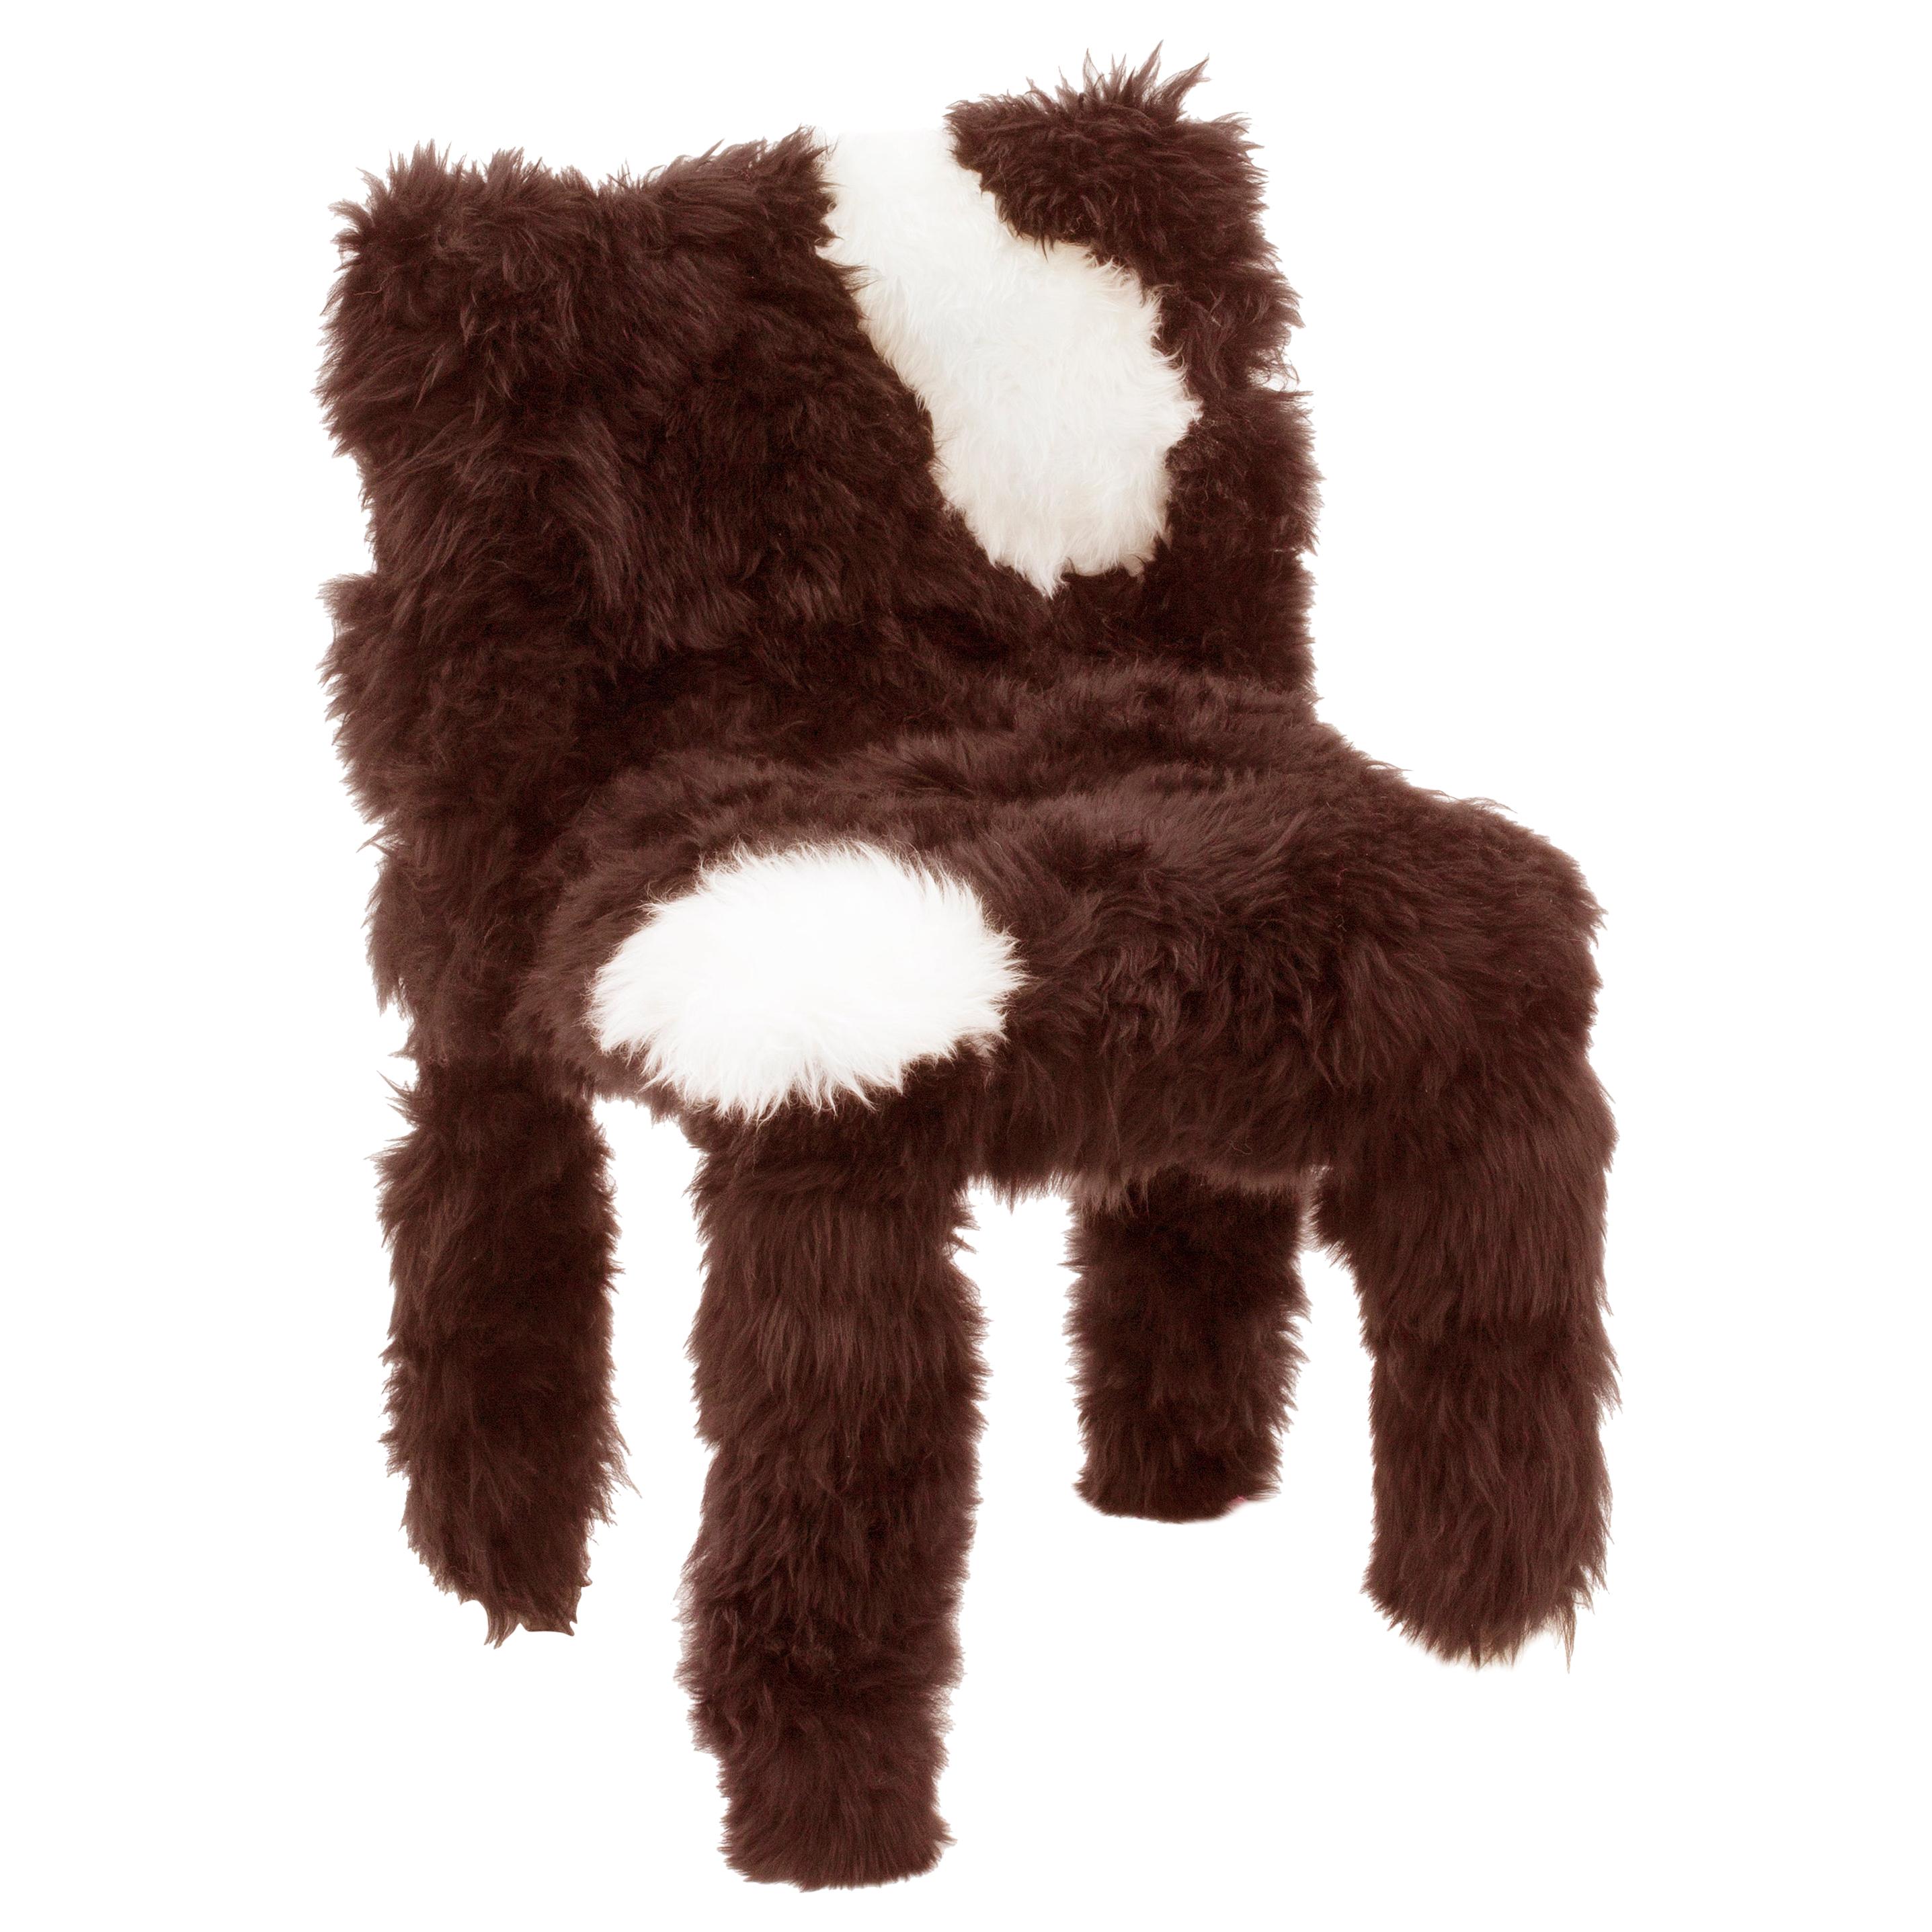 Campana Brothers, "Chica Chair", Brown and White Wool, 2017